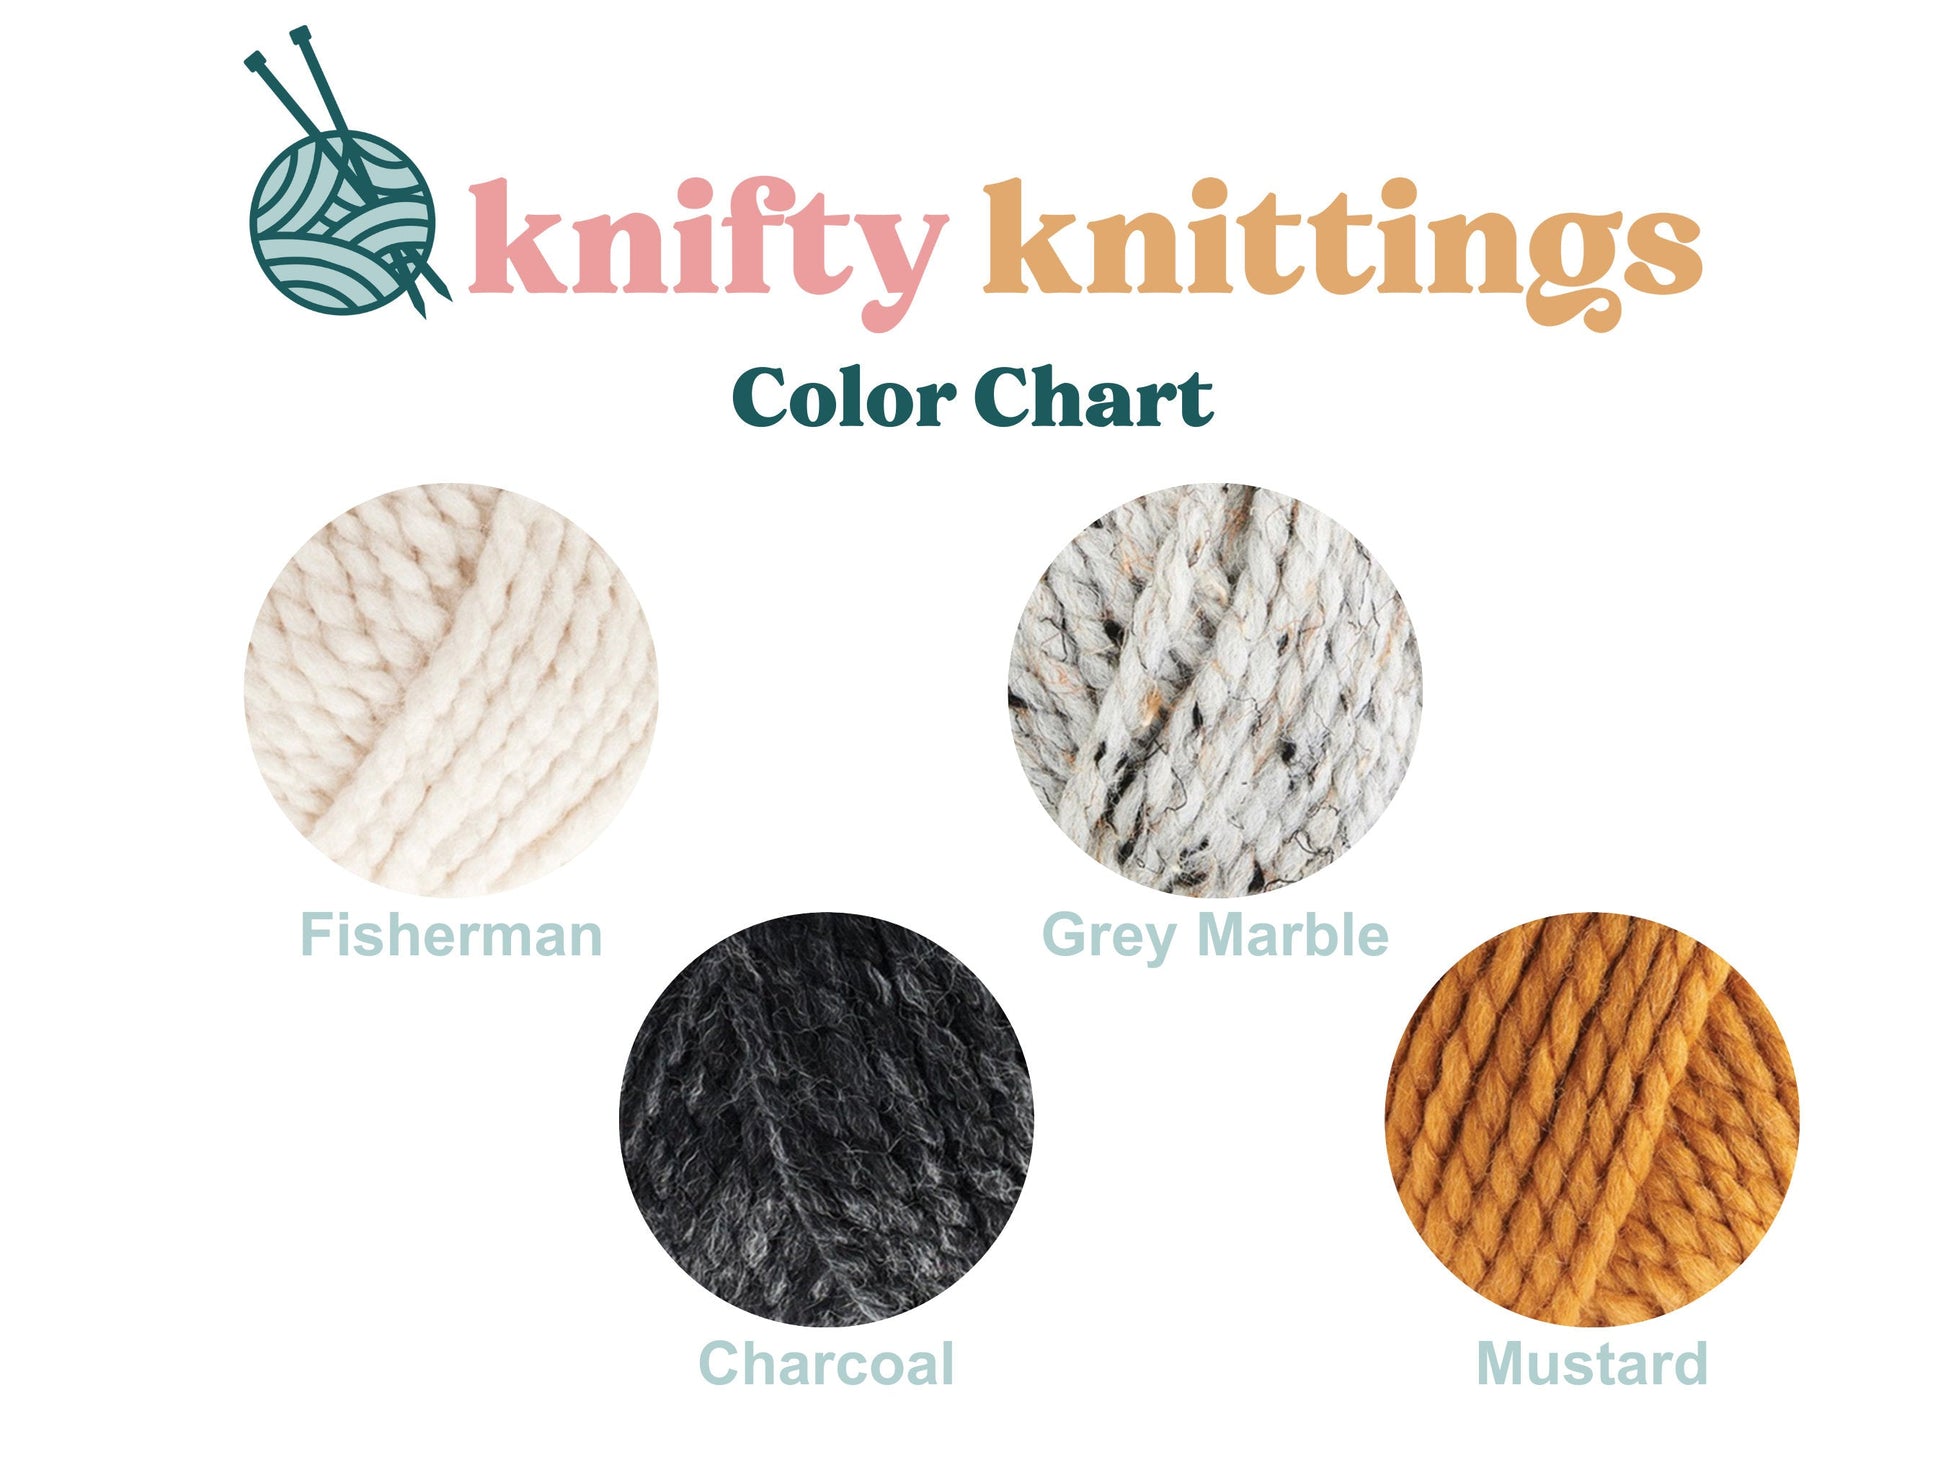  NGHTMRKT Scarf Knitting Kit for Beginners Adults - Learn to  Knit with this Starter Knitting Kit including Yarn and Needles. Our  Complete Beginners Knitting Kit is the ideal DIY Arts 